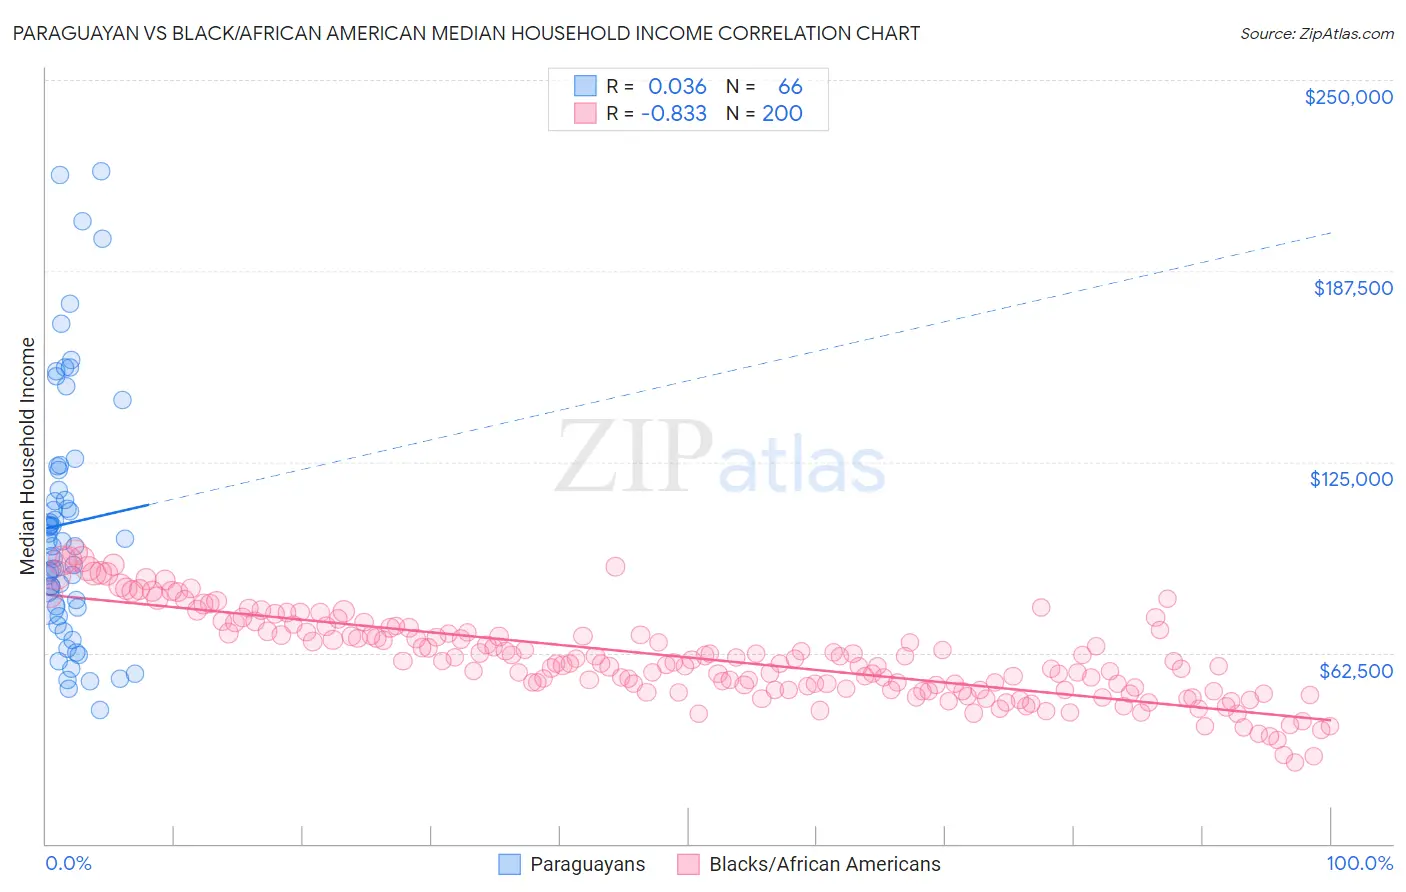 Paraguayan vs Black/African American Median Household Income